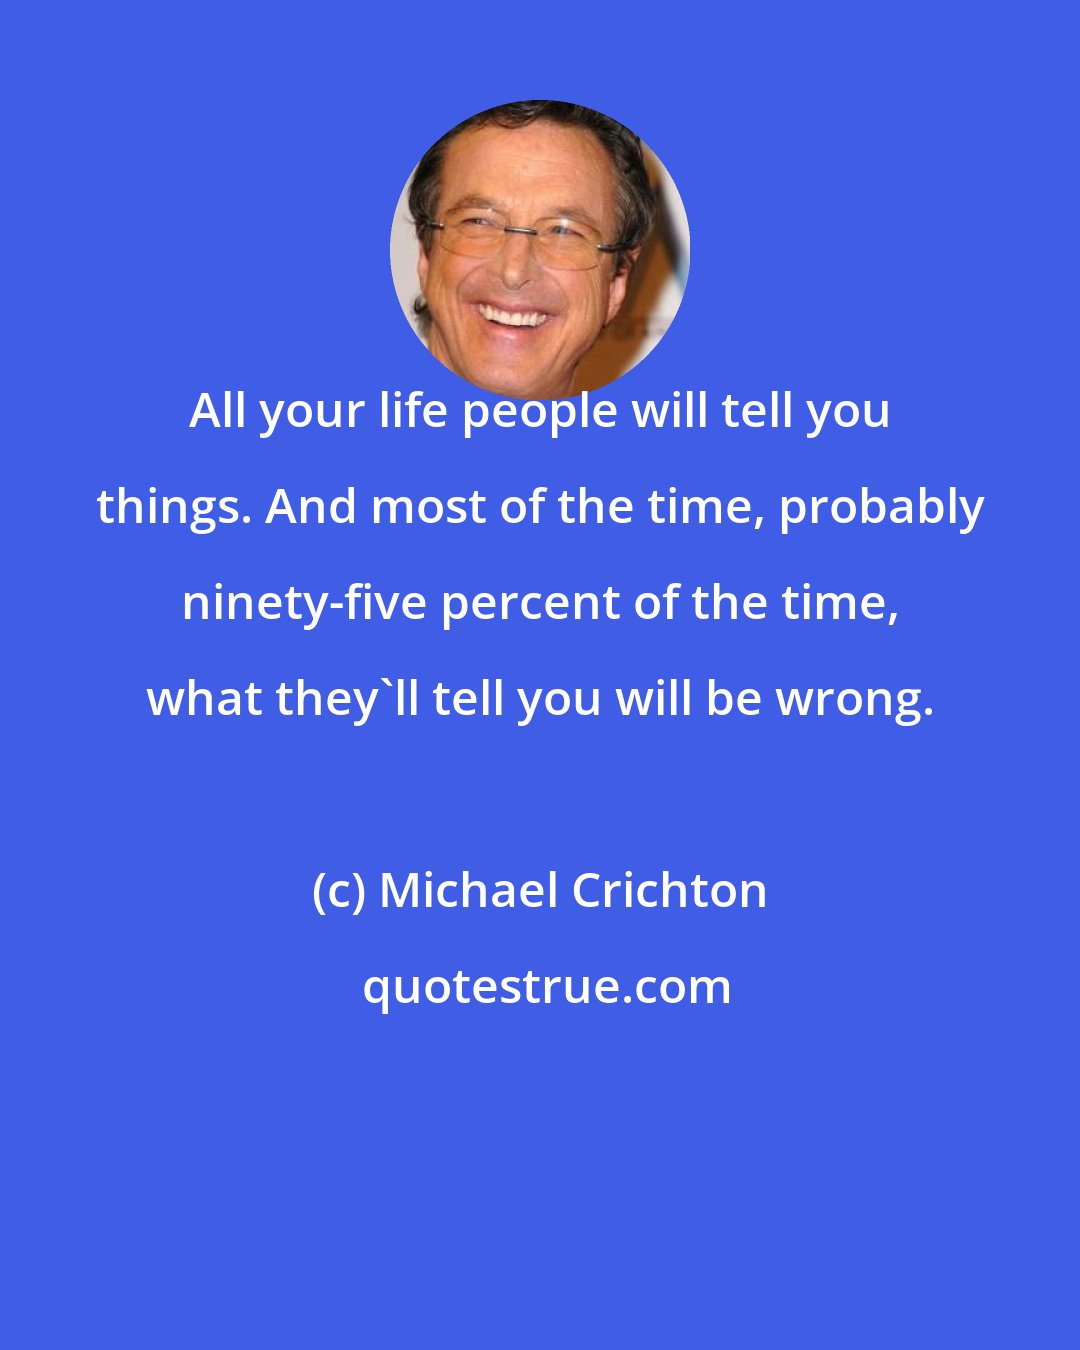 Michael Crichton: All your life people will tell you things. And most of the time, probably ninety-five percent of the time, what they'll tell you will be wrong.